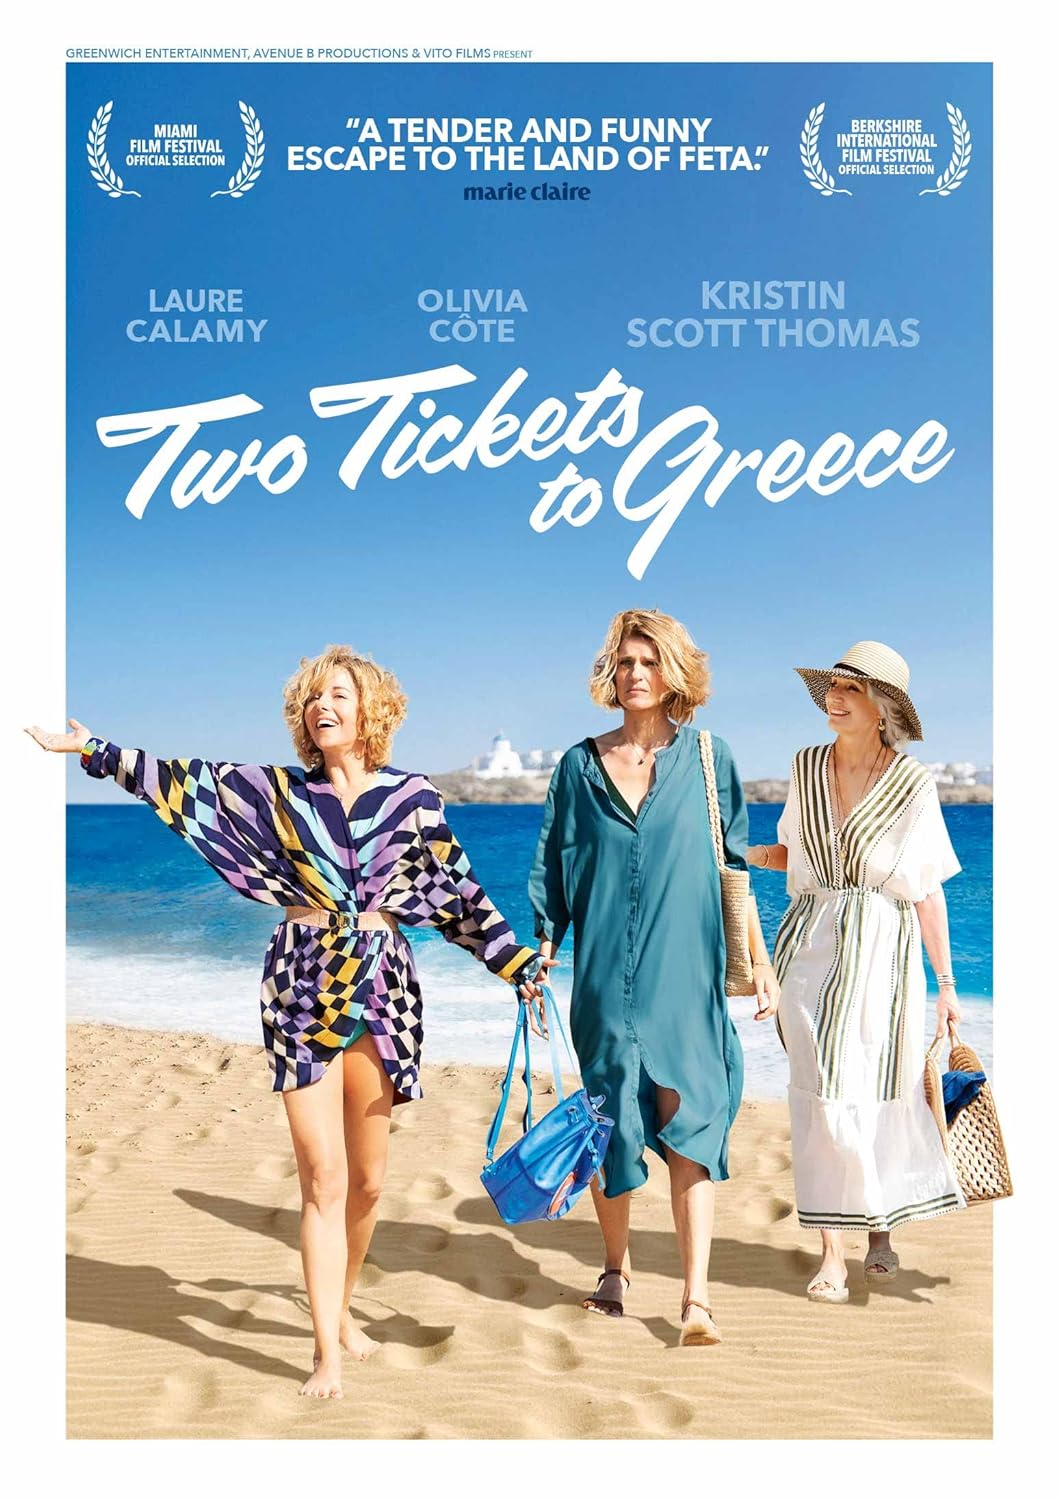 TWO TICKETS TO GREECE